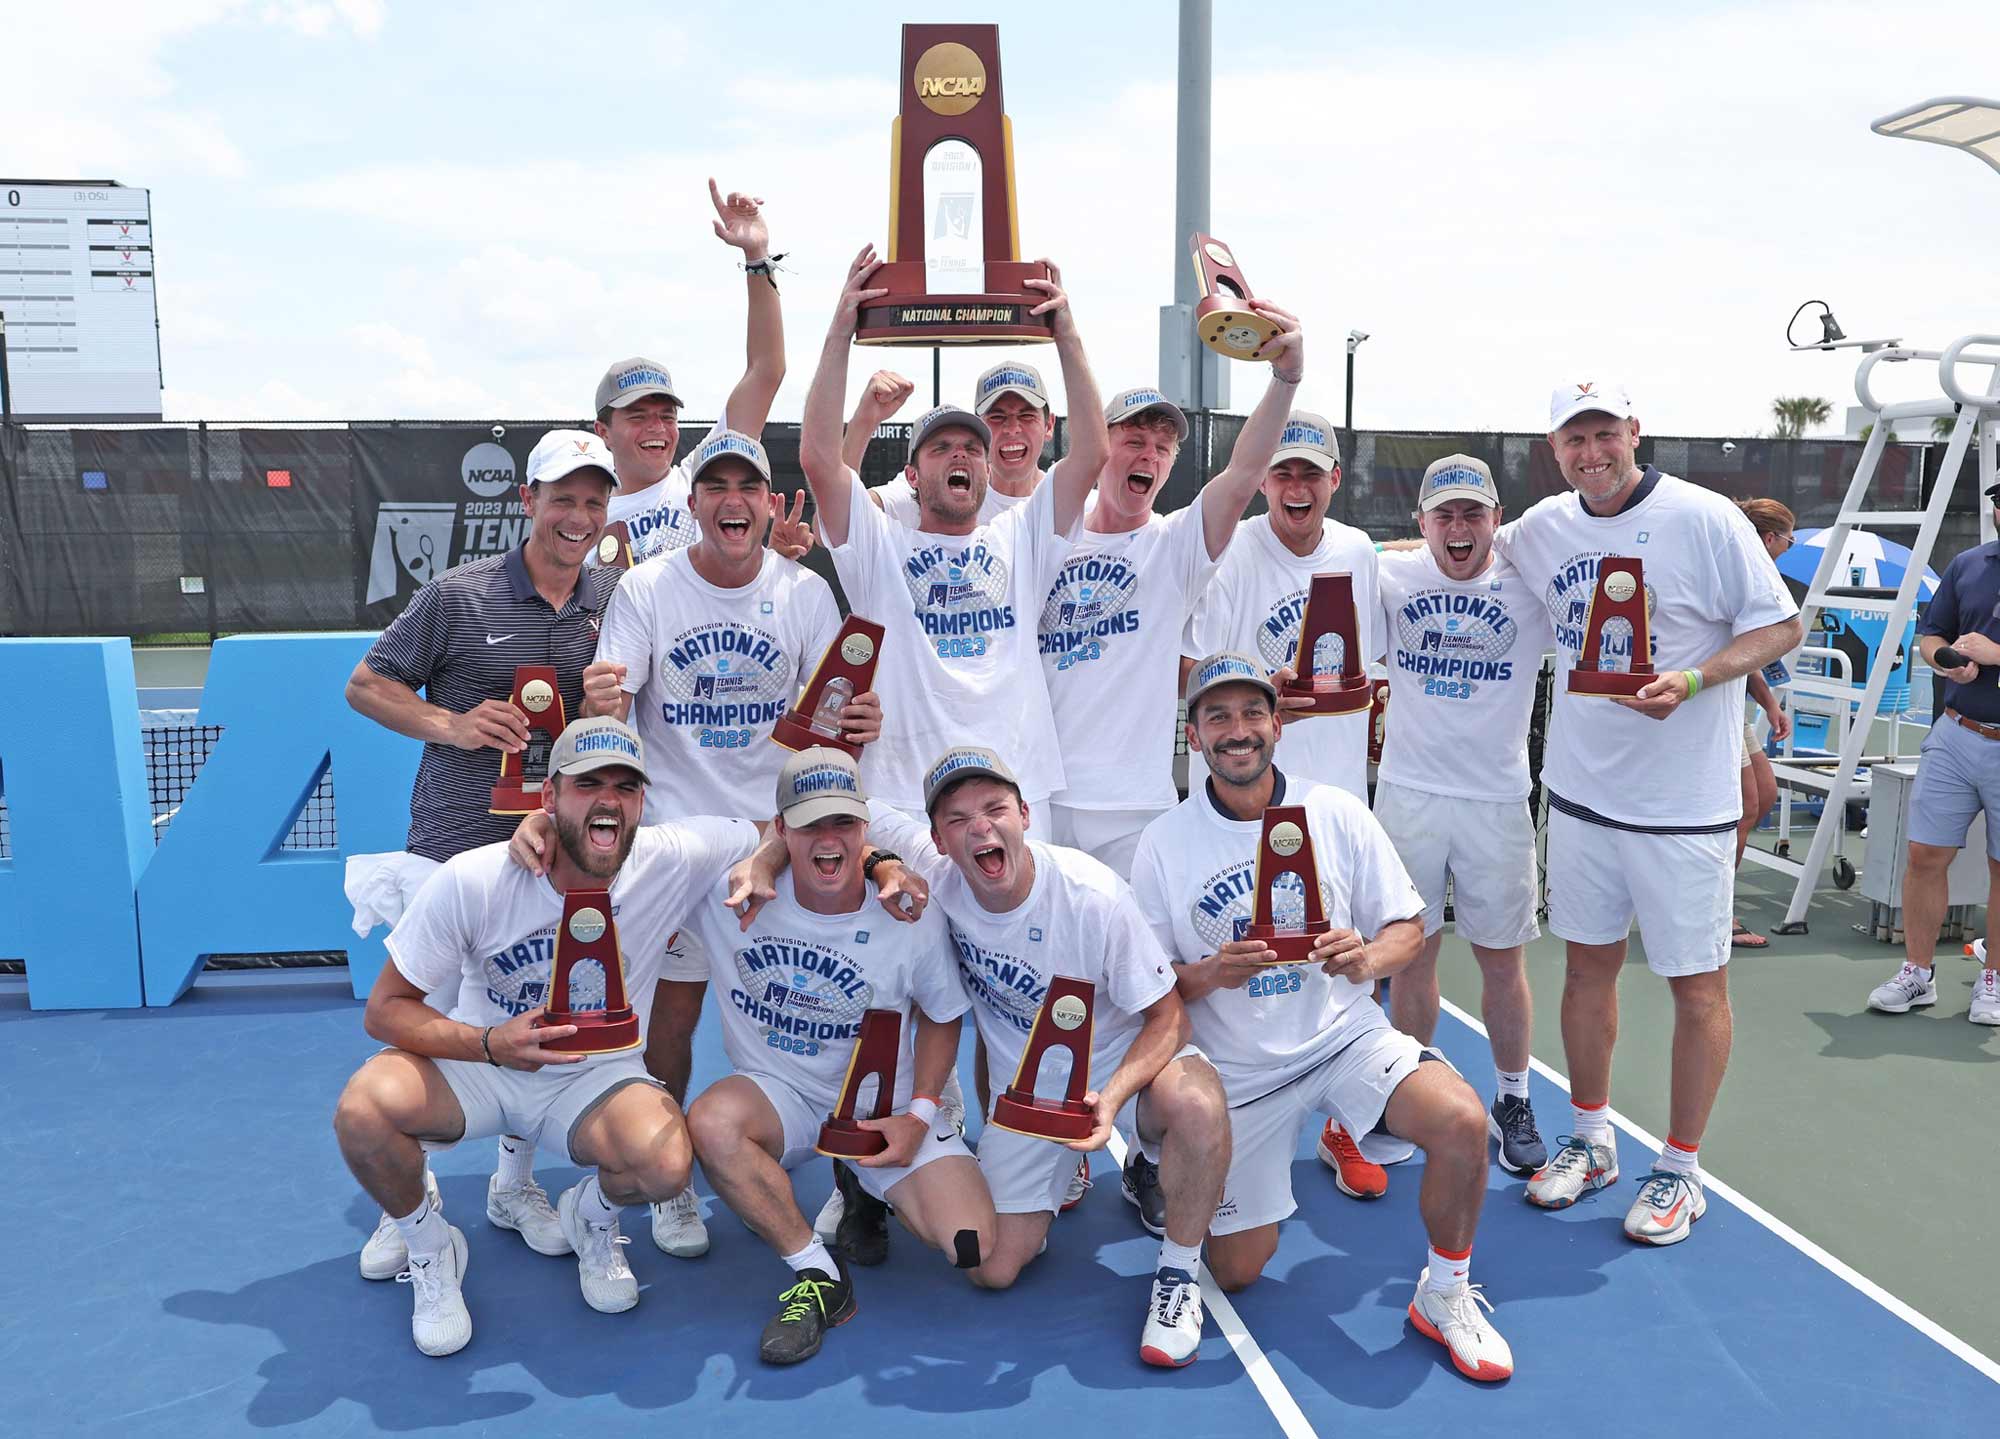 UVA Men's tennis team taking a celebratory group photo with trophies